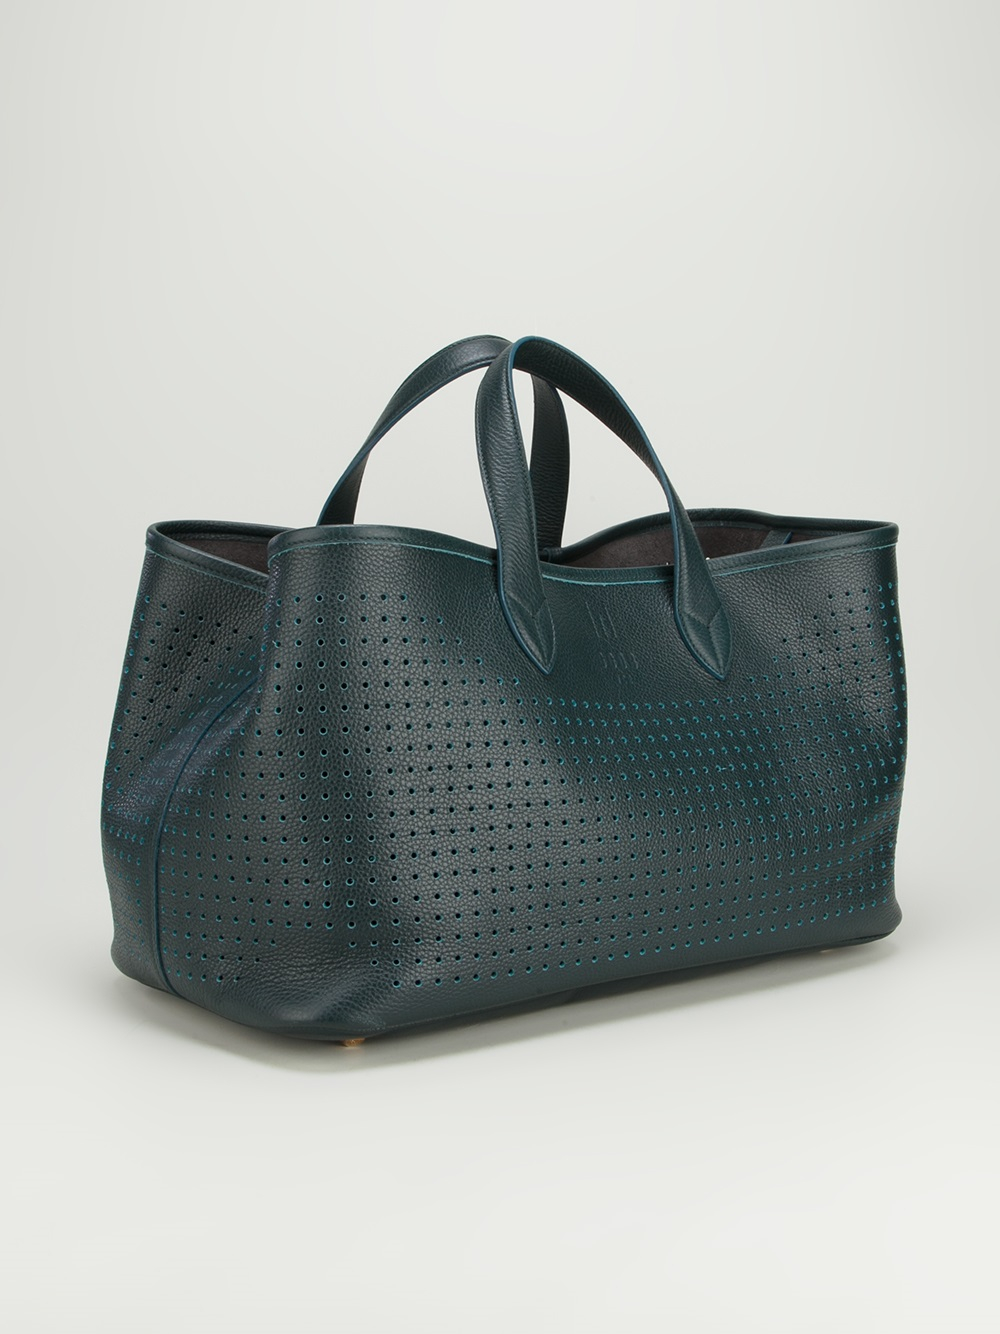 Lyst - Golden Goose Deluxe Brand Coast Leather Perforated Bag in Green